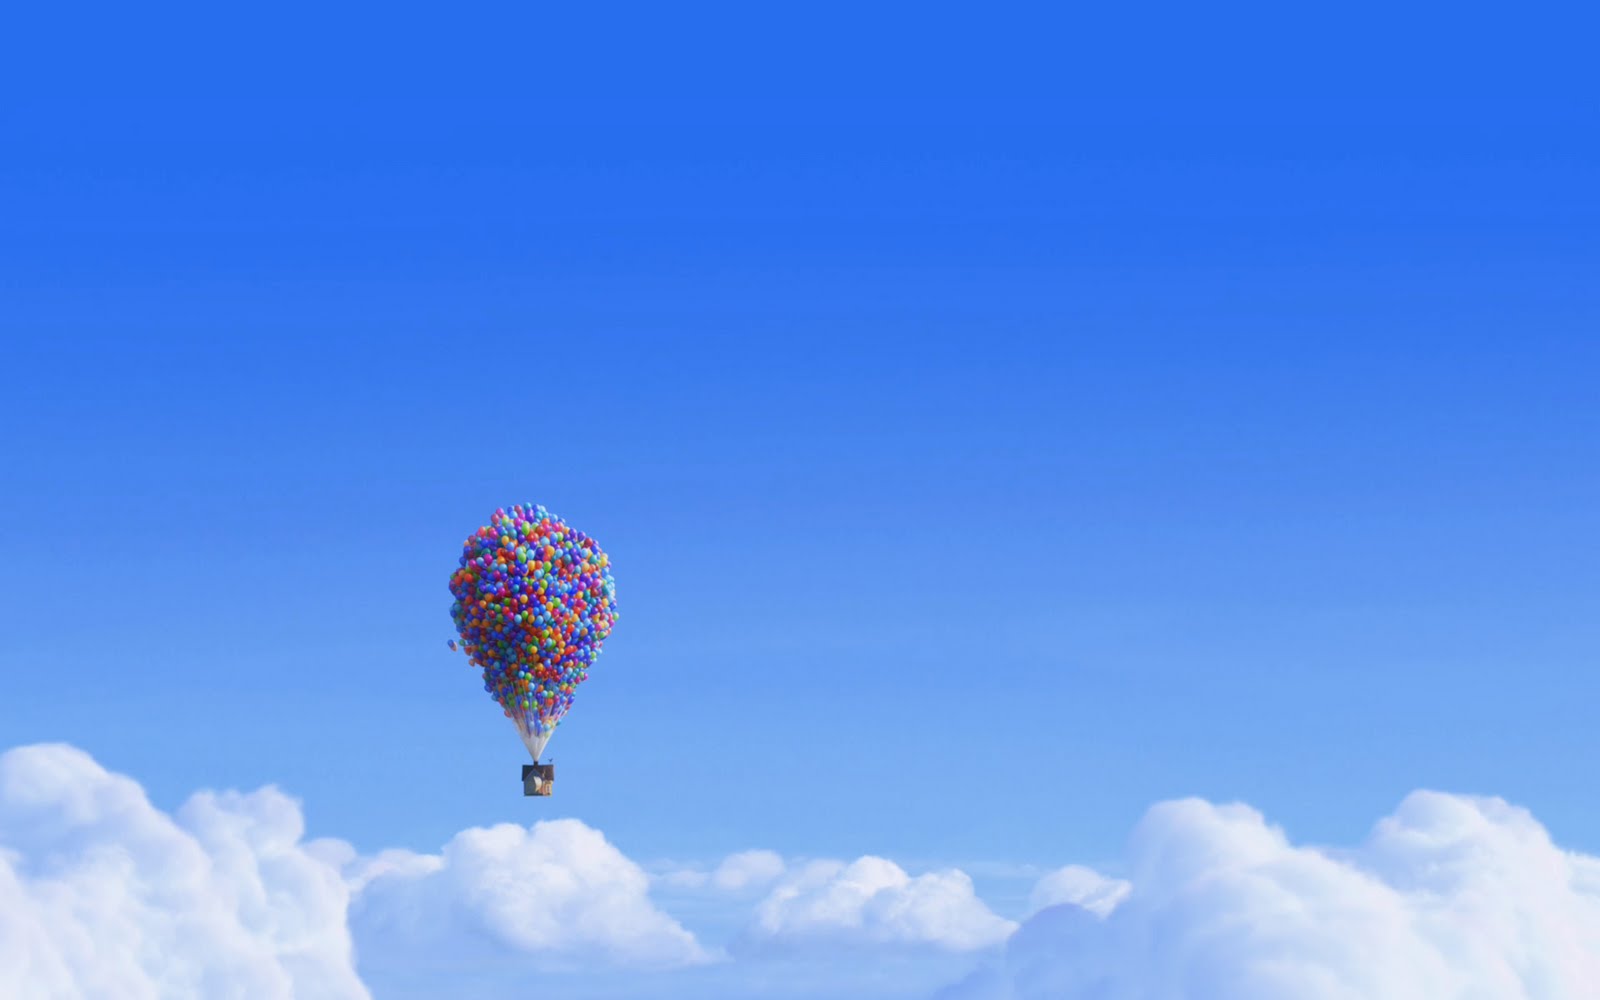 Pixar Studios HD Wallpaper High Resolution Background For Your